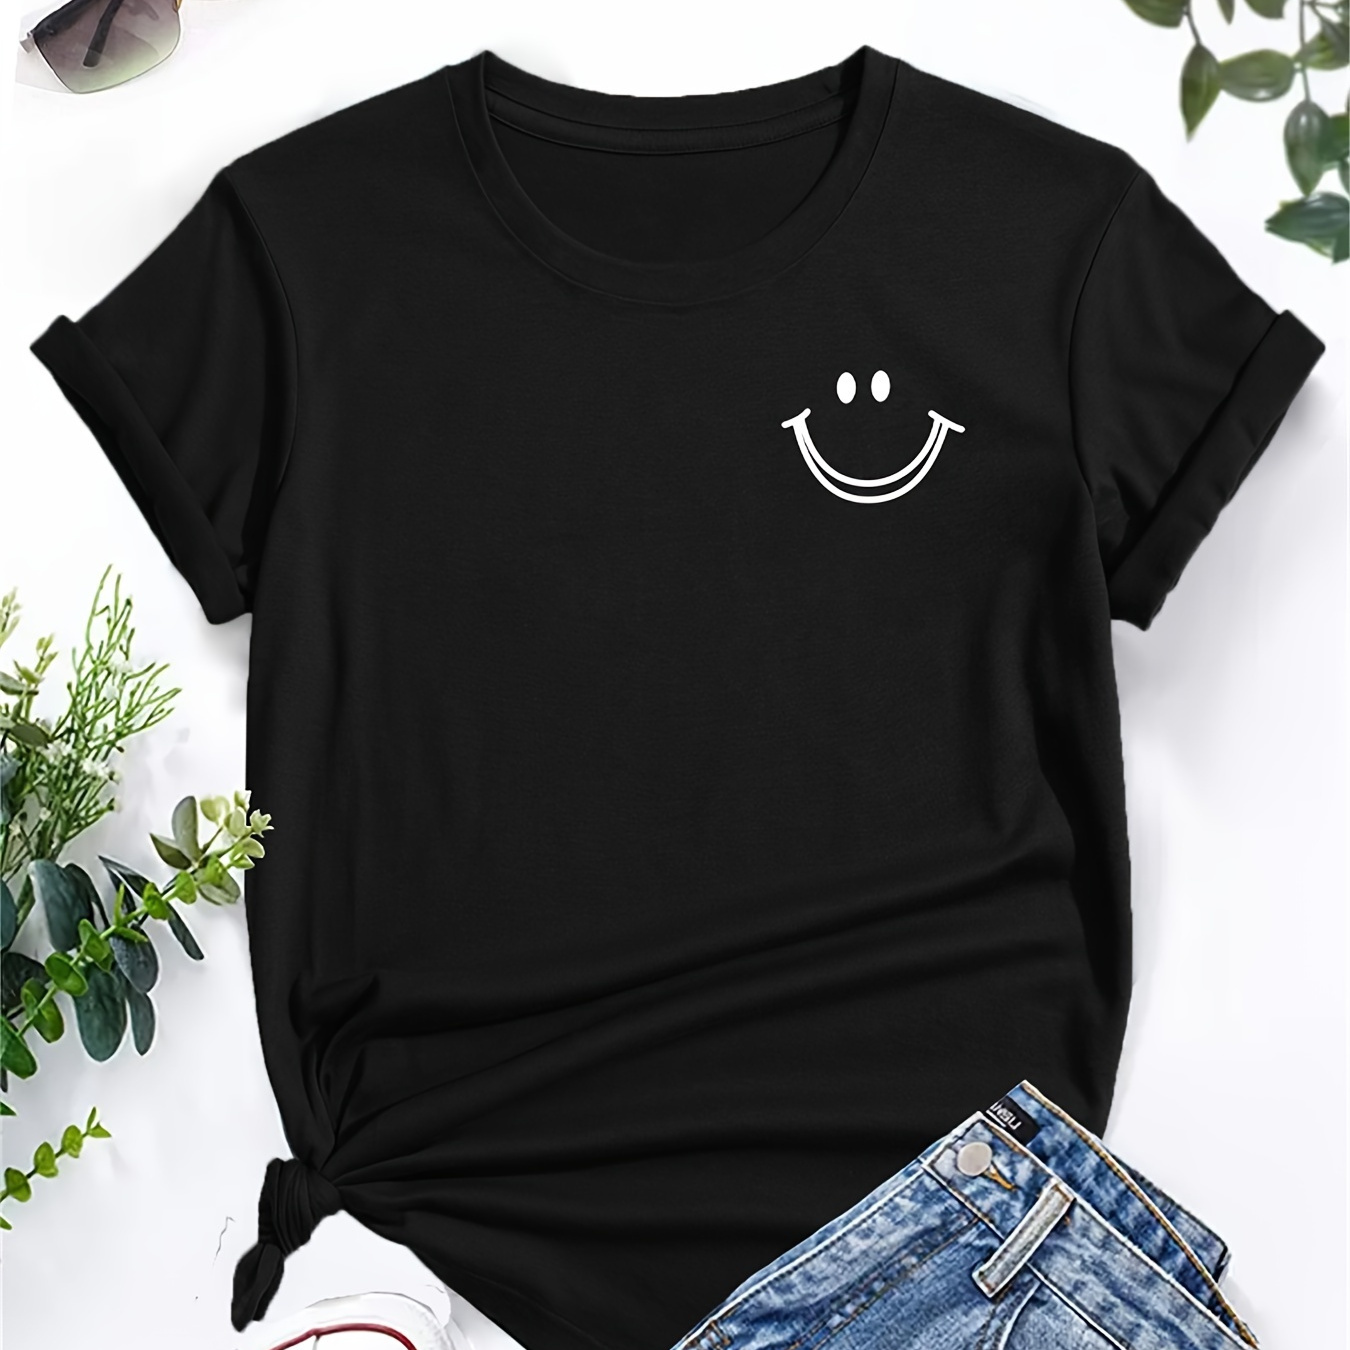 

Smiling Face Print Casual T-shirt, Round Neck Short Sleeves Stretchy Comfy Versatile Sports Tee, Women's Tops